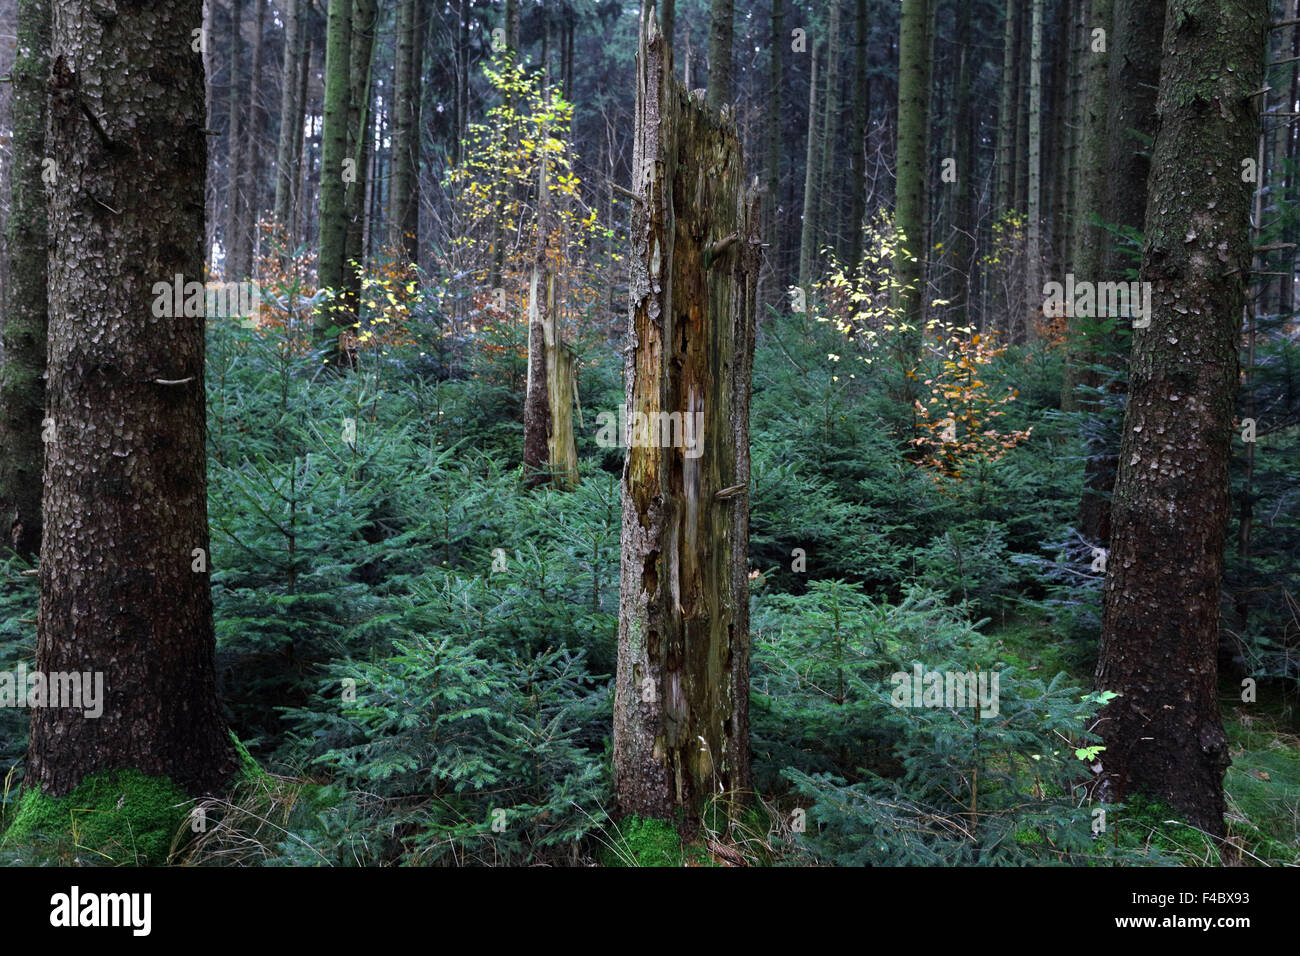 Natural rejuvination in a spruce forest Stock Photo